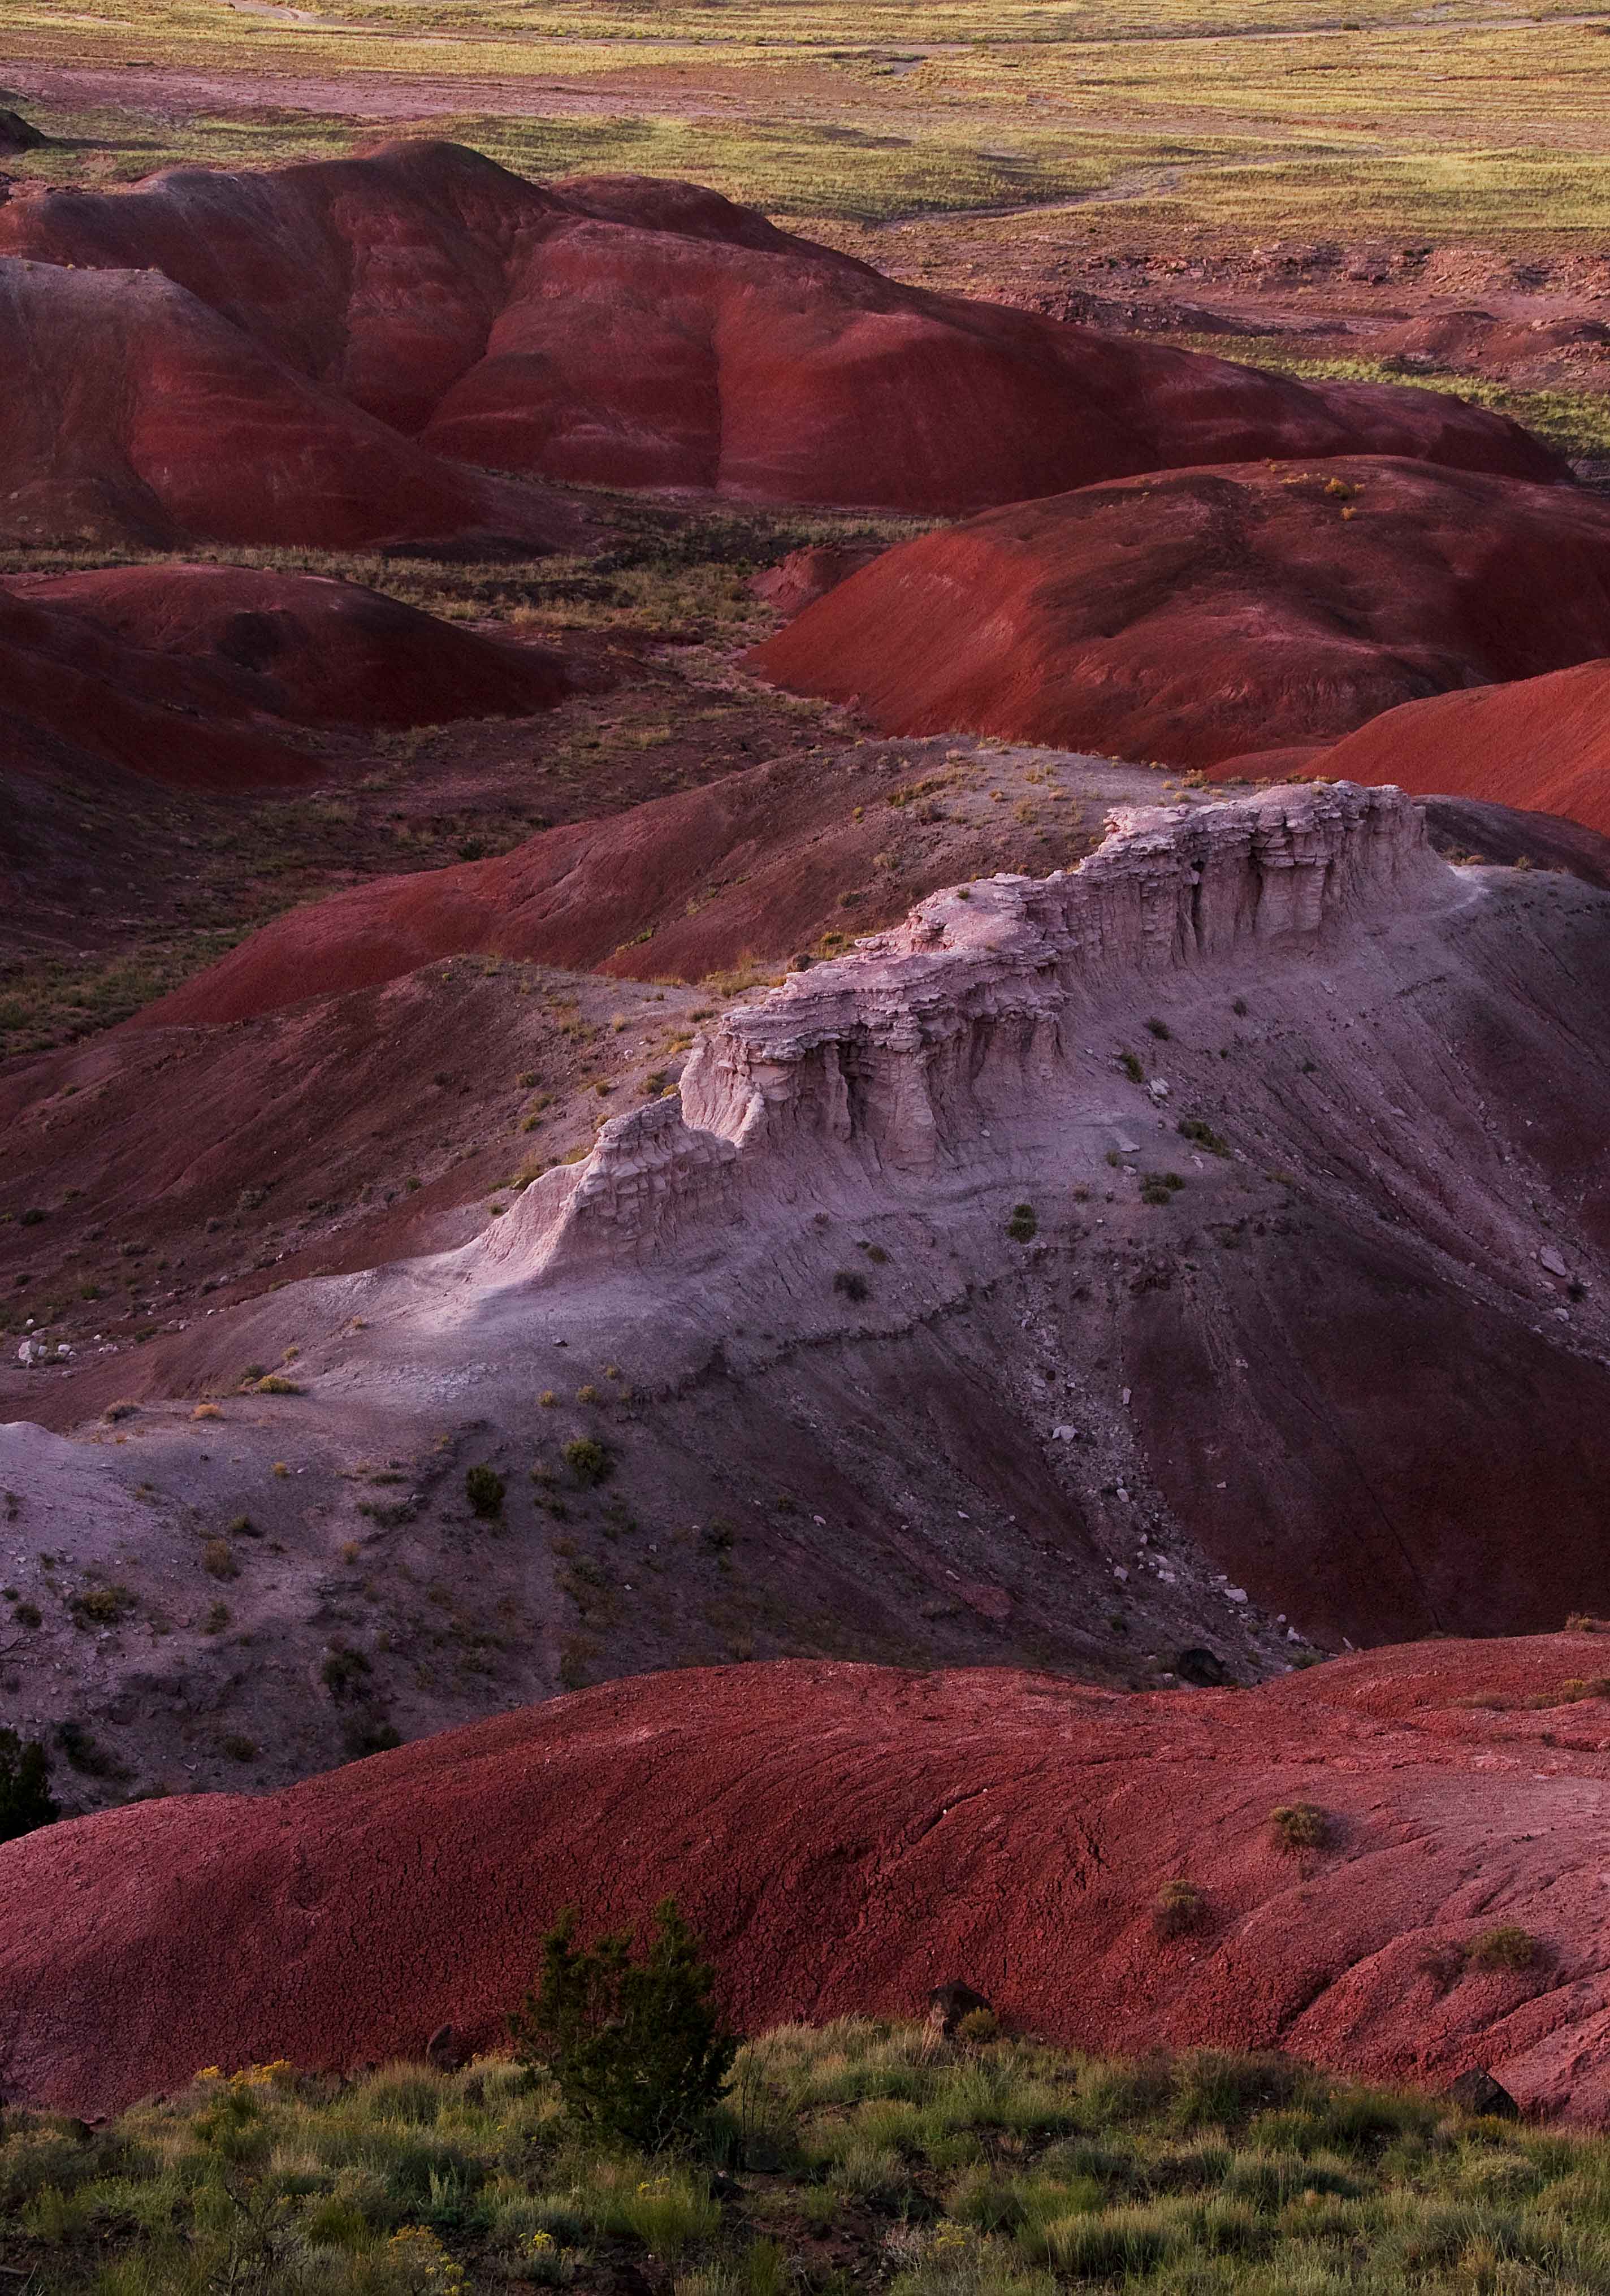 The Painted Desert at Petrified Forest National Park in northern Arizona